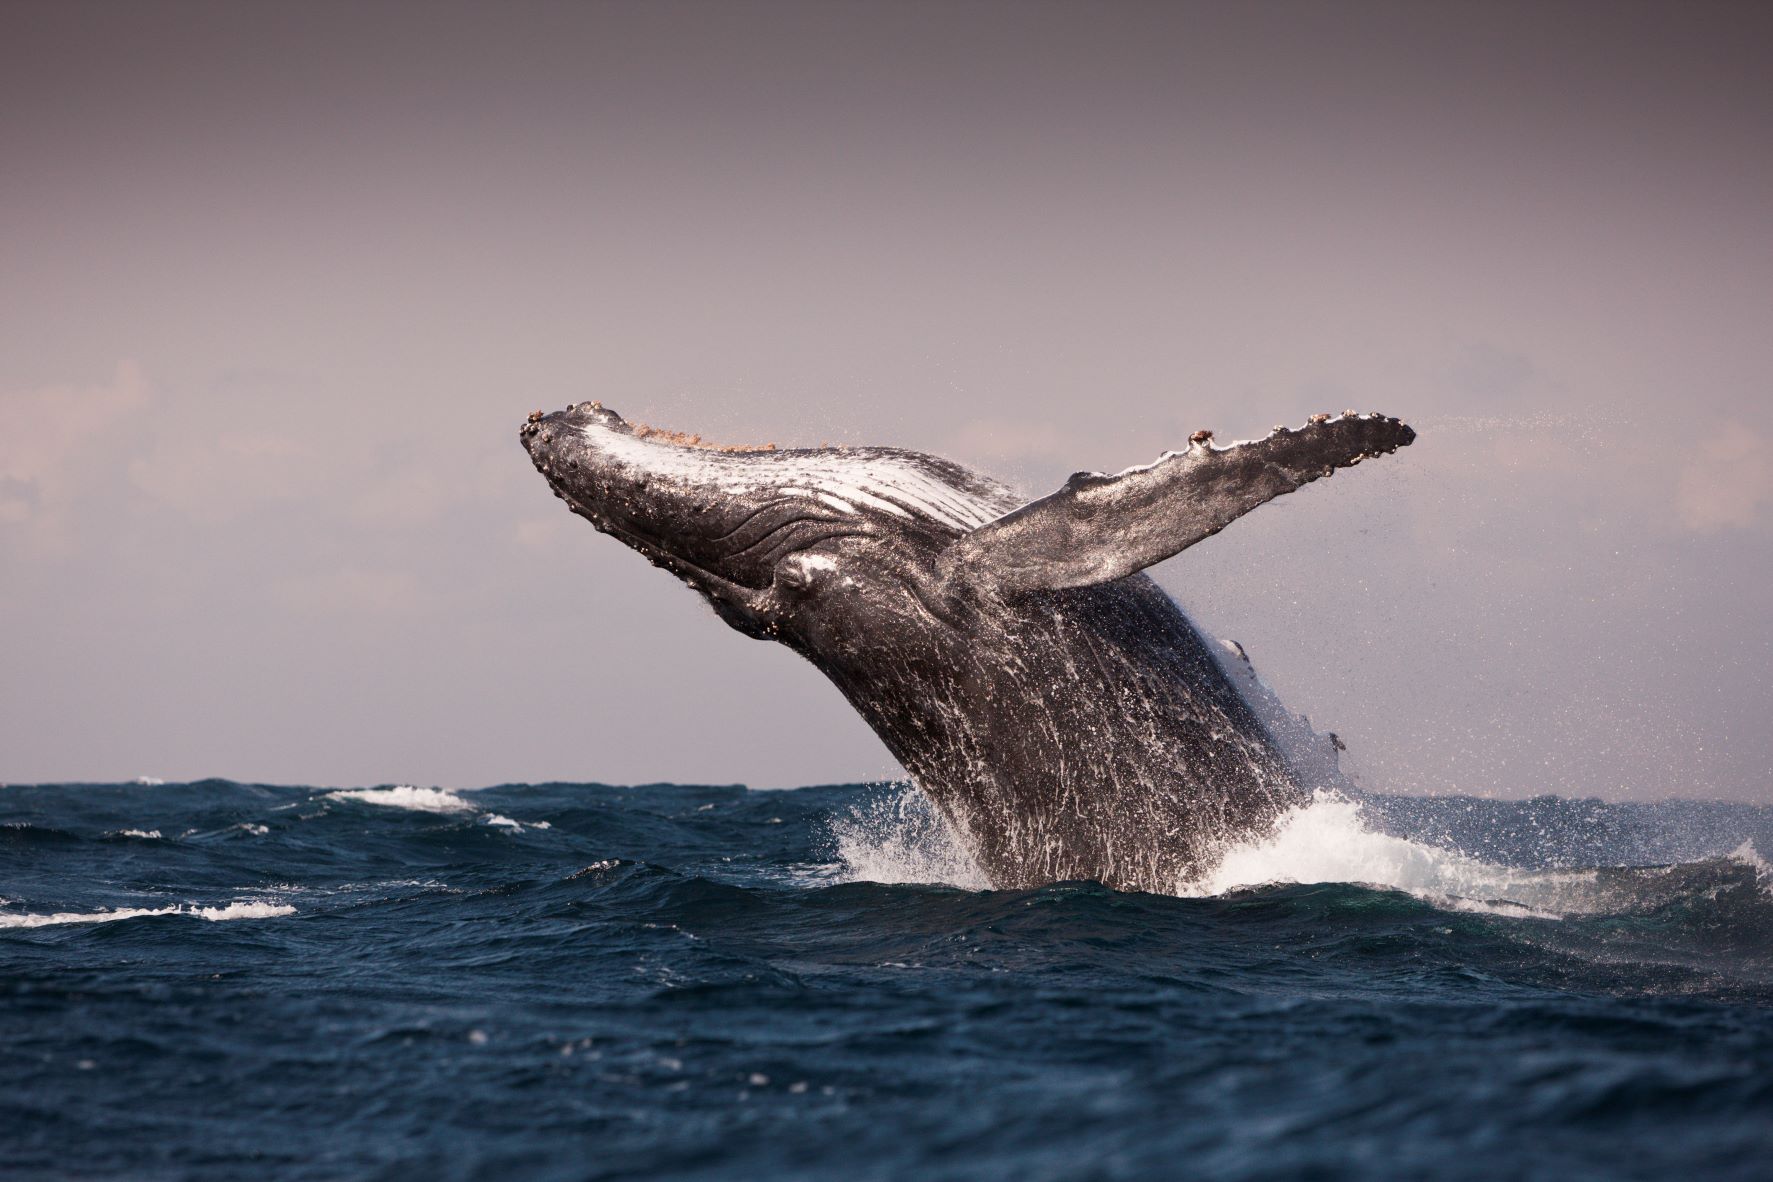 Humpback whale breaches over the ocean for a story about singing whales around Maui, Hawaii